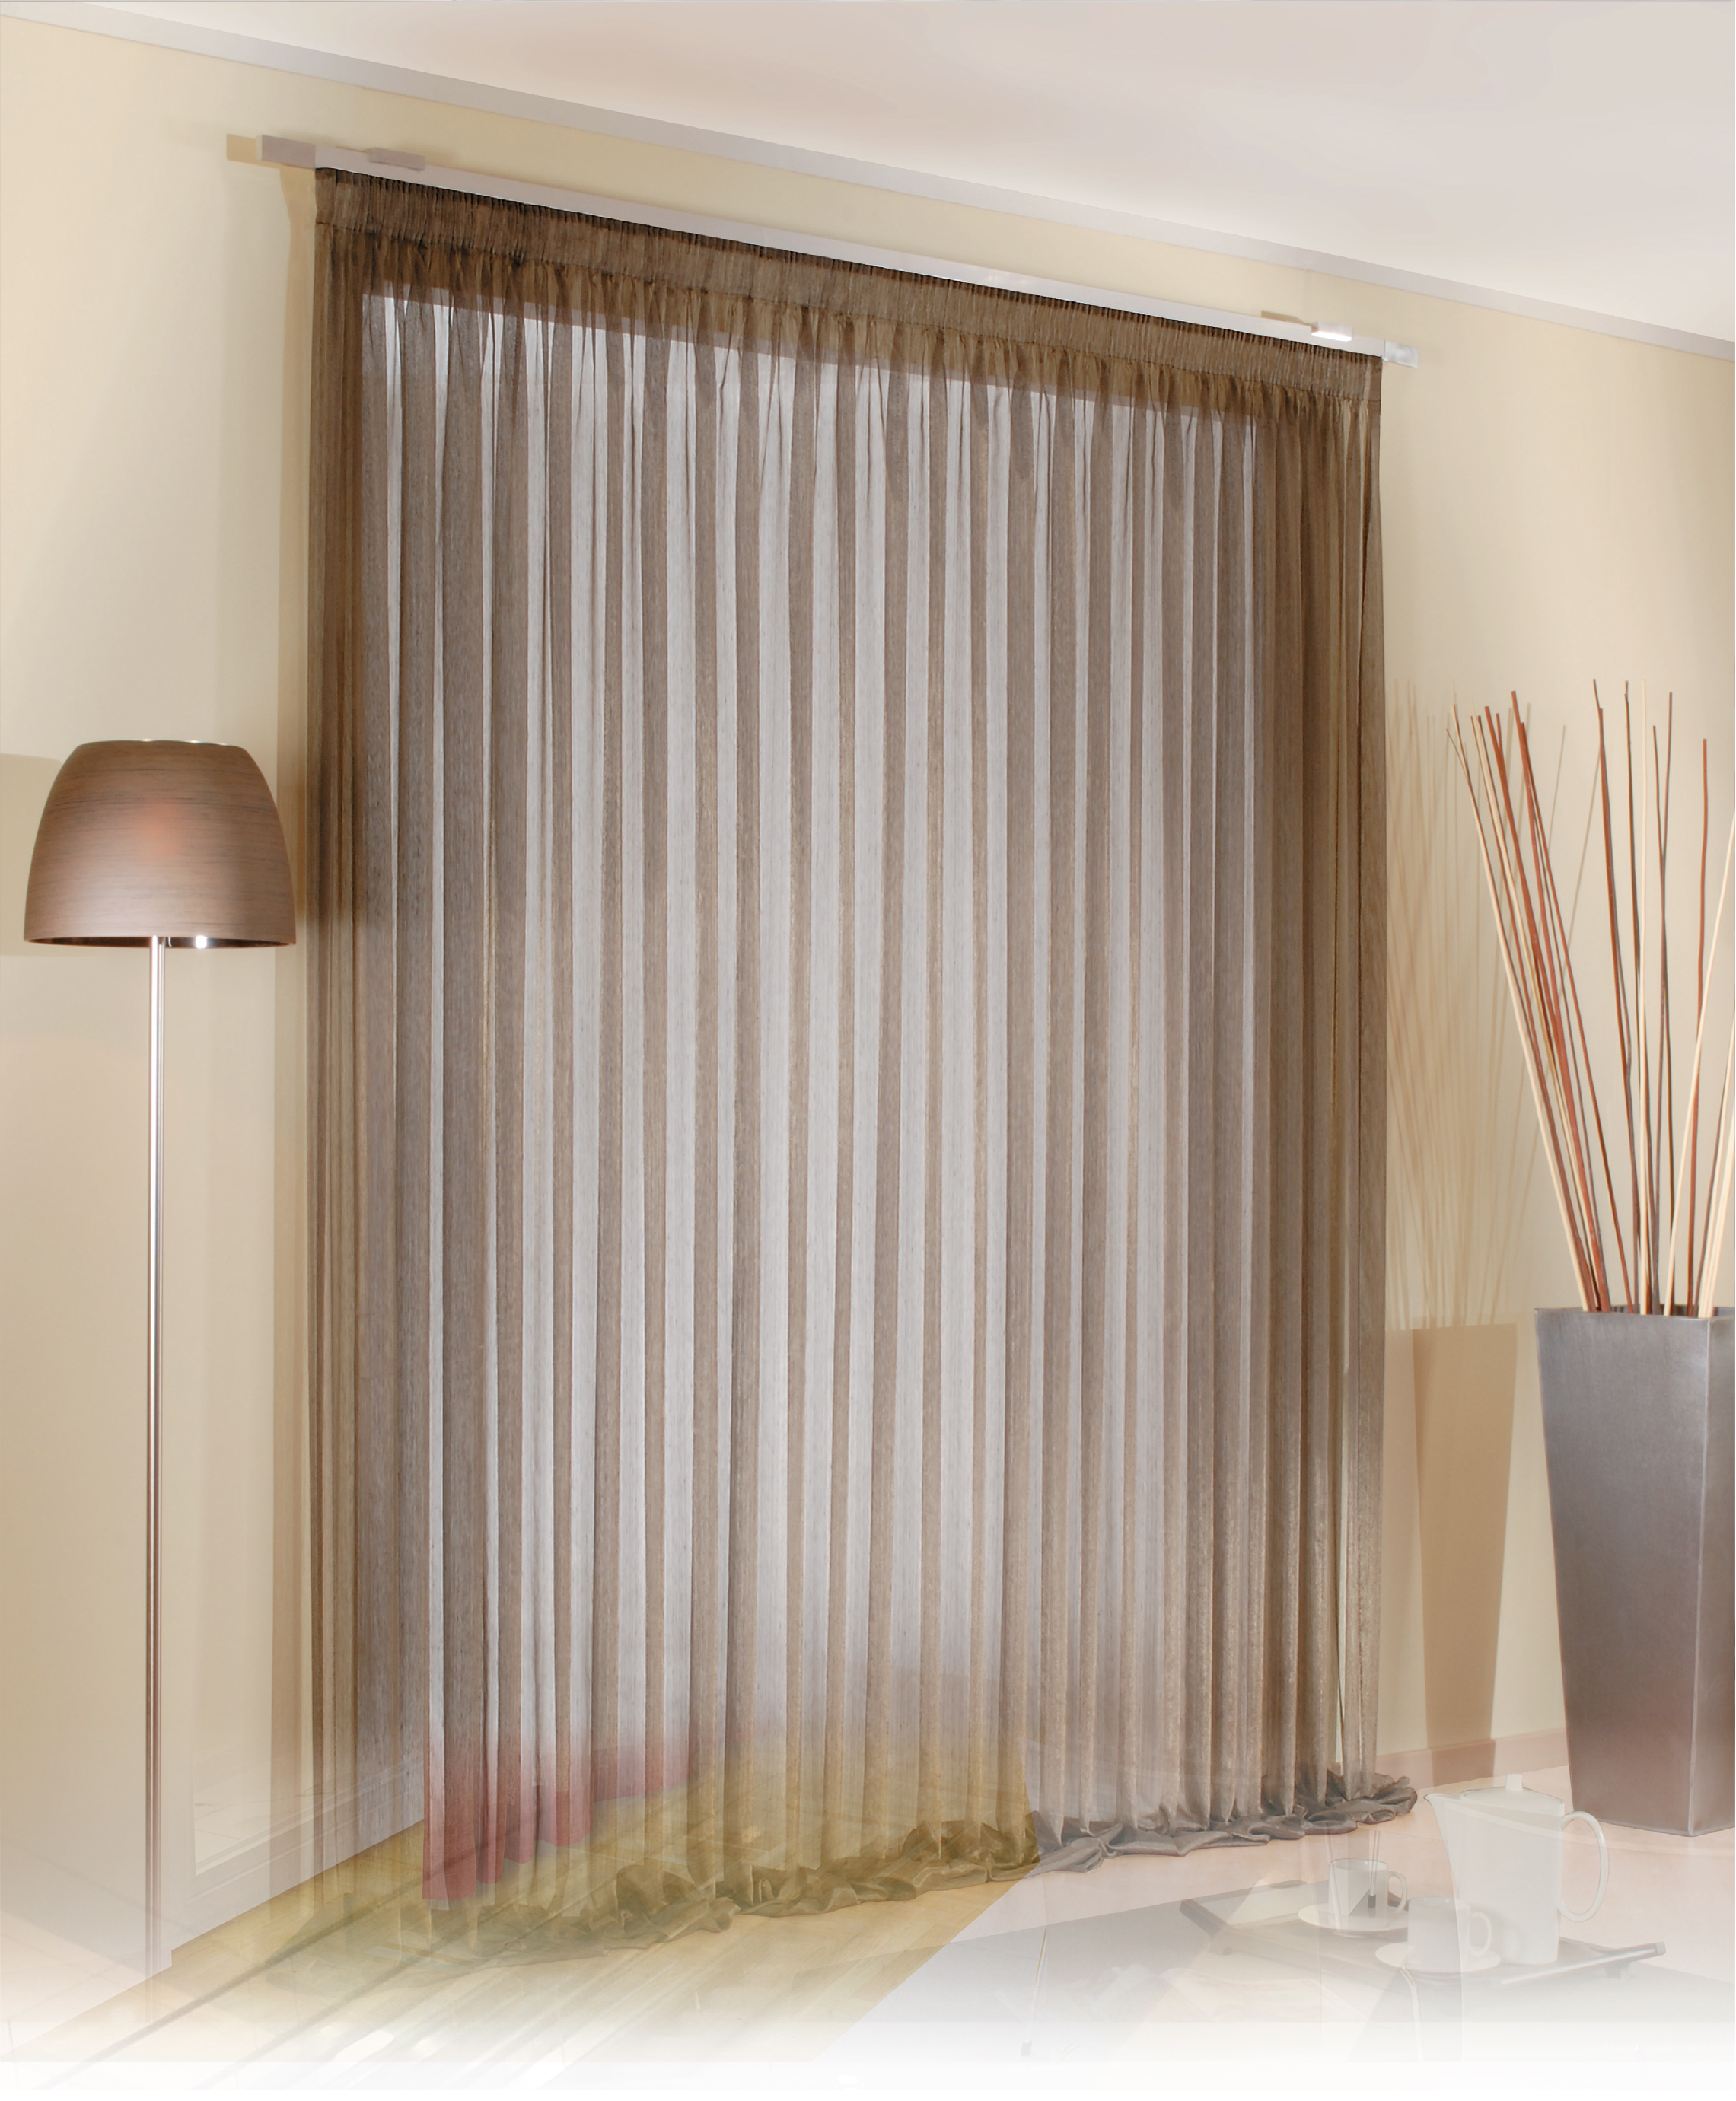 3.Electric curtain’s fabric weight